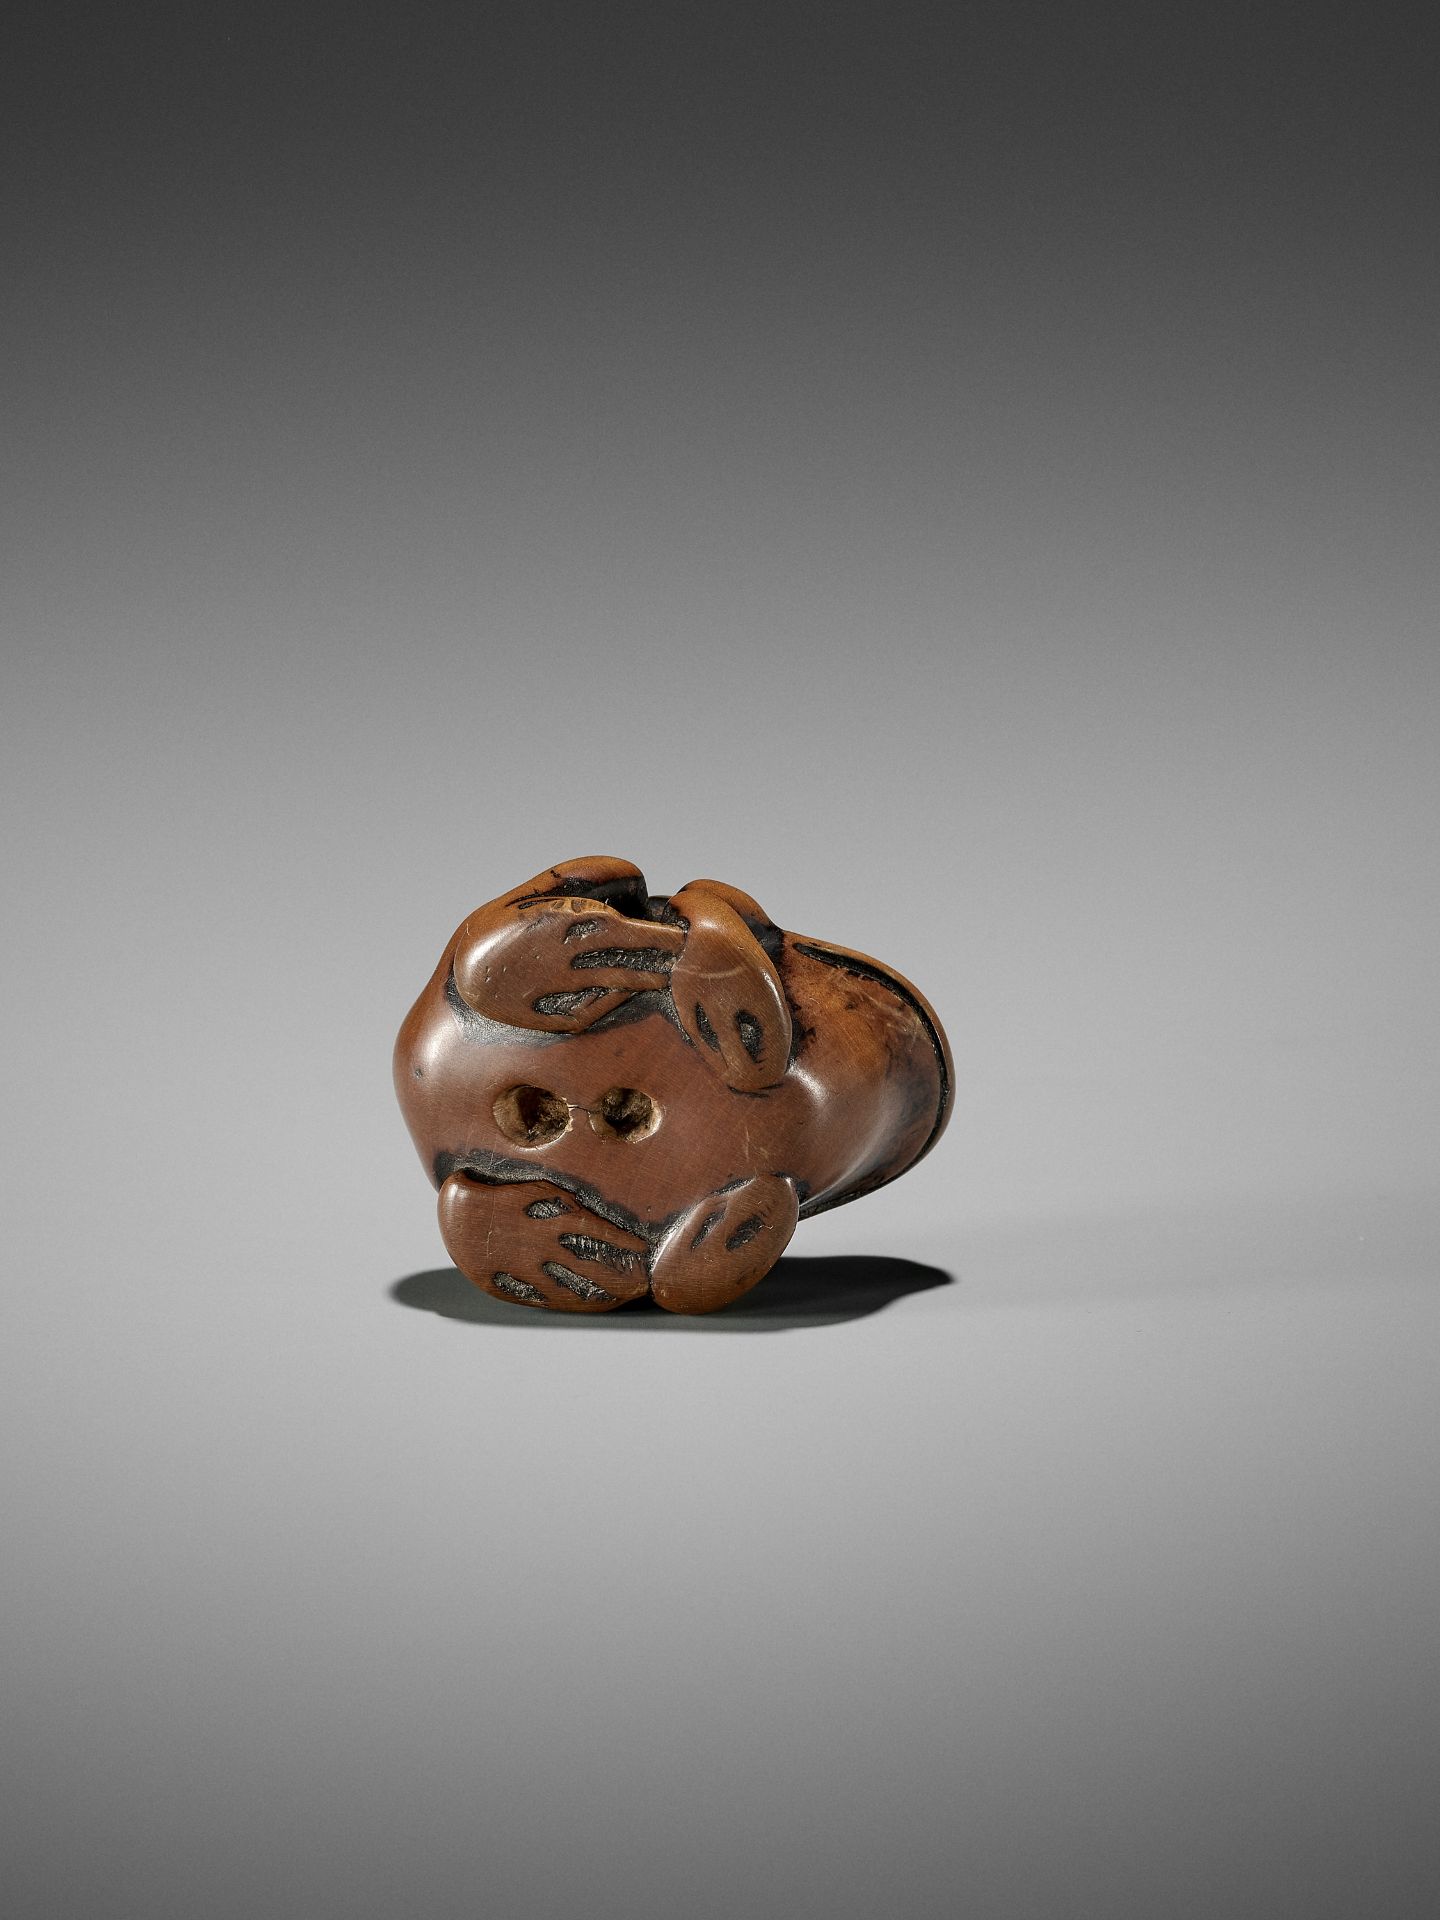 AN EARLY WOOD NETSUKE OF A TOAD - Image 12 of 12